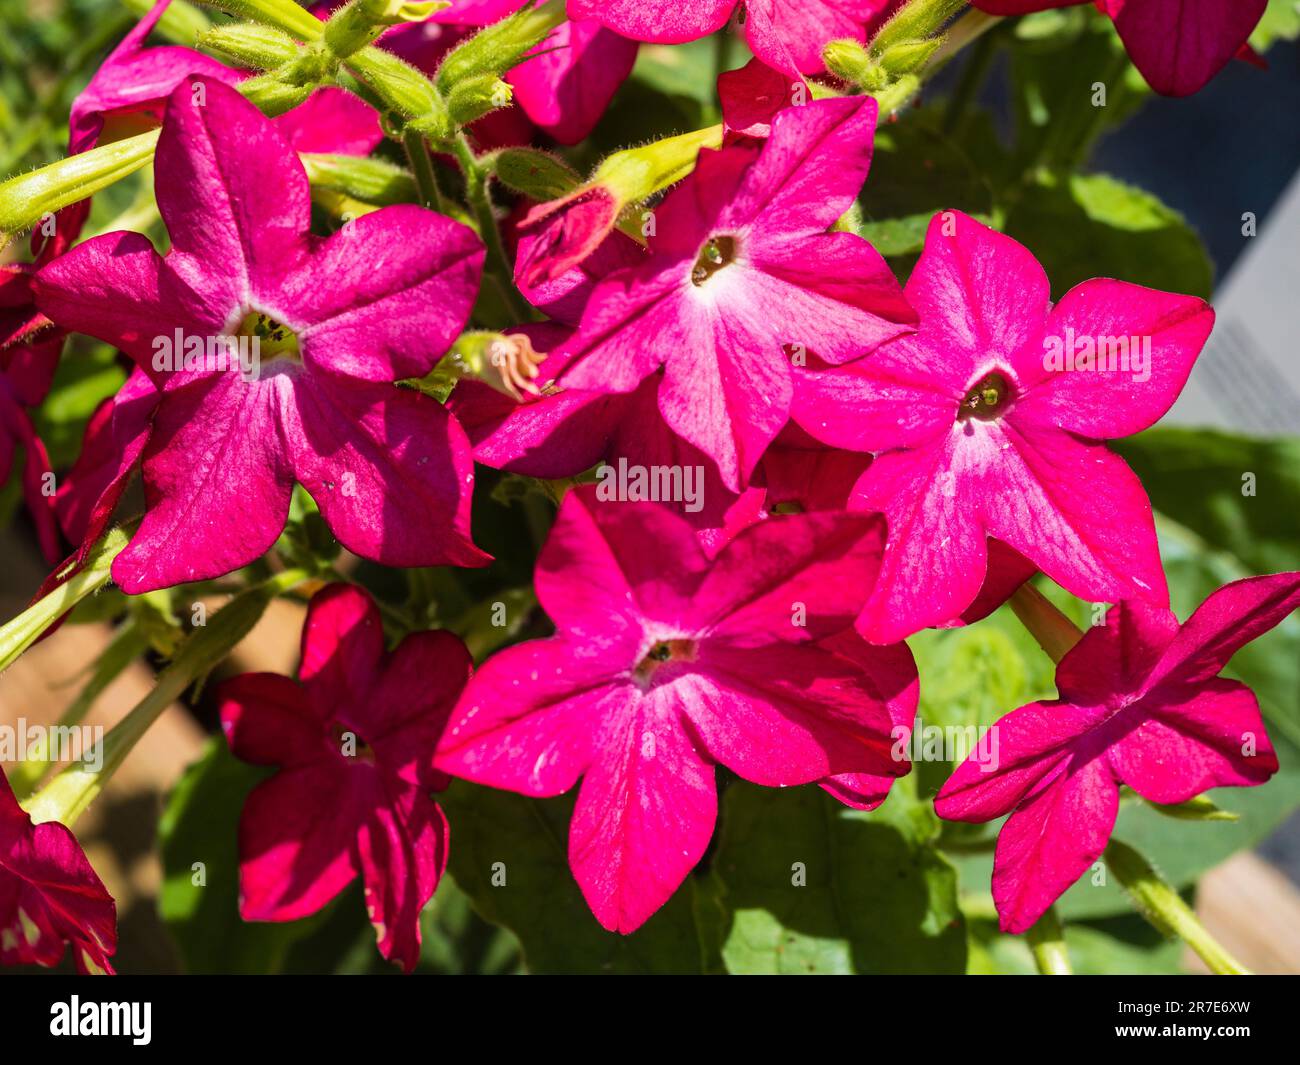 Dark pink summer flowers of the annual tobacco plant, Nicotiana alata 'Saratago Mixed' Stock Photo